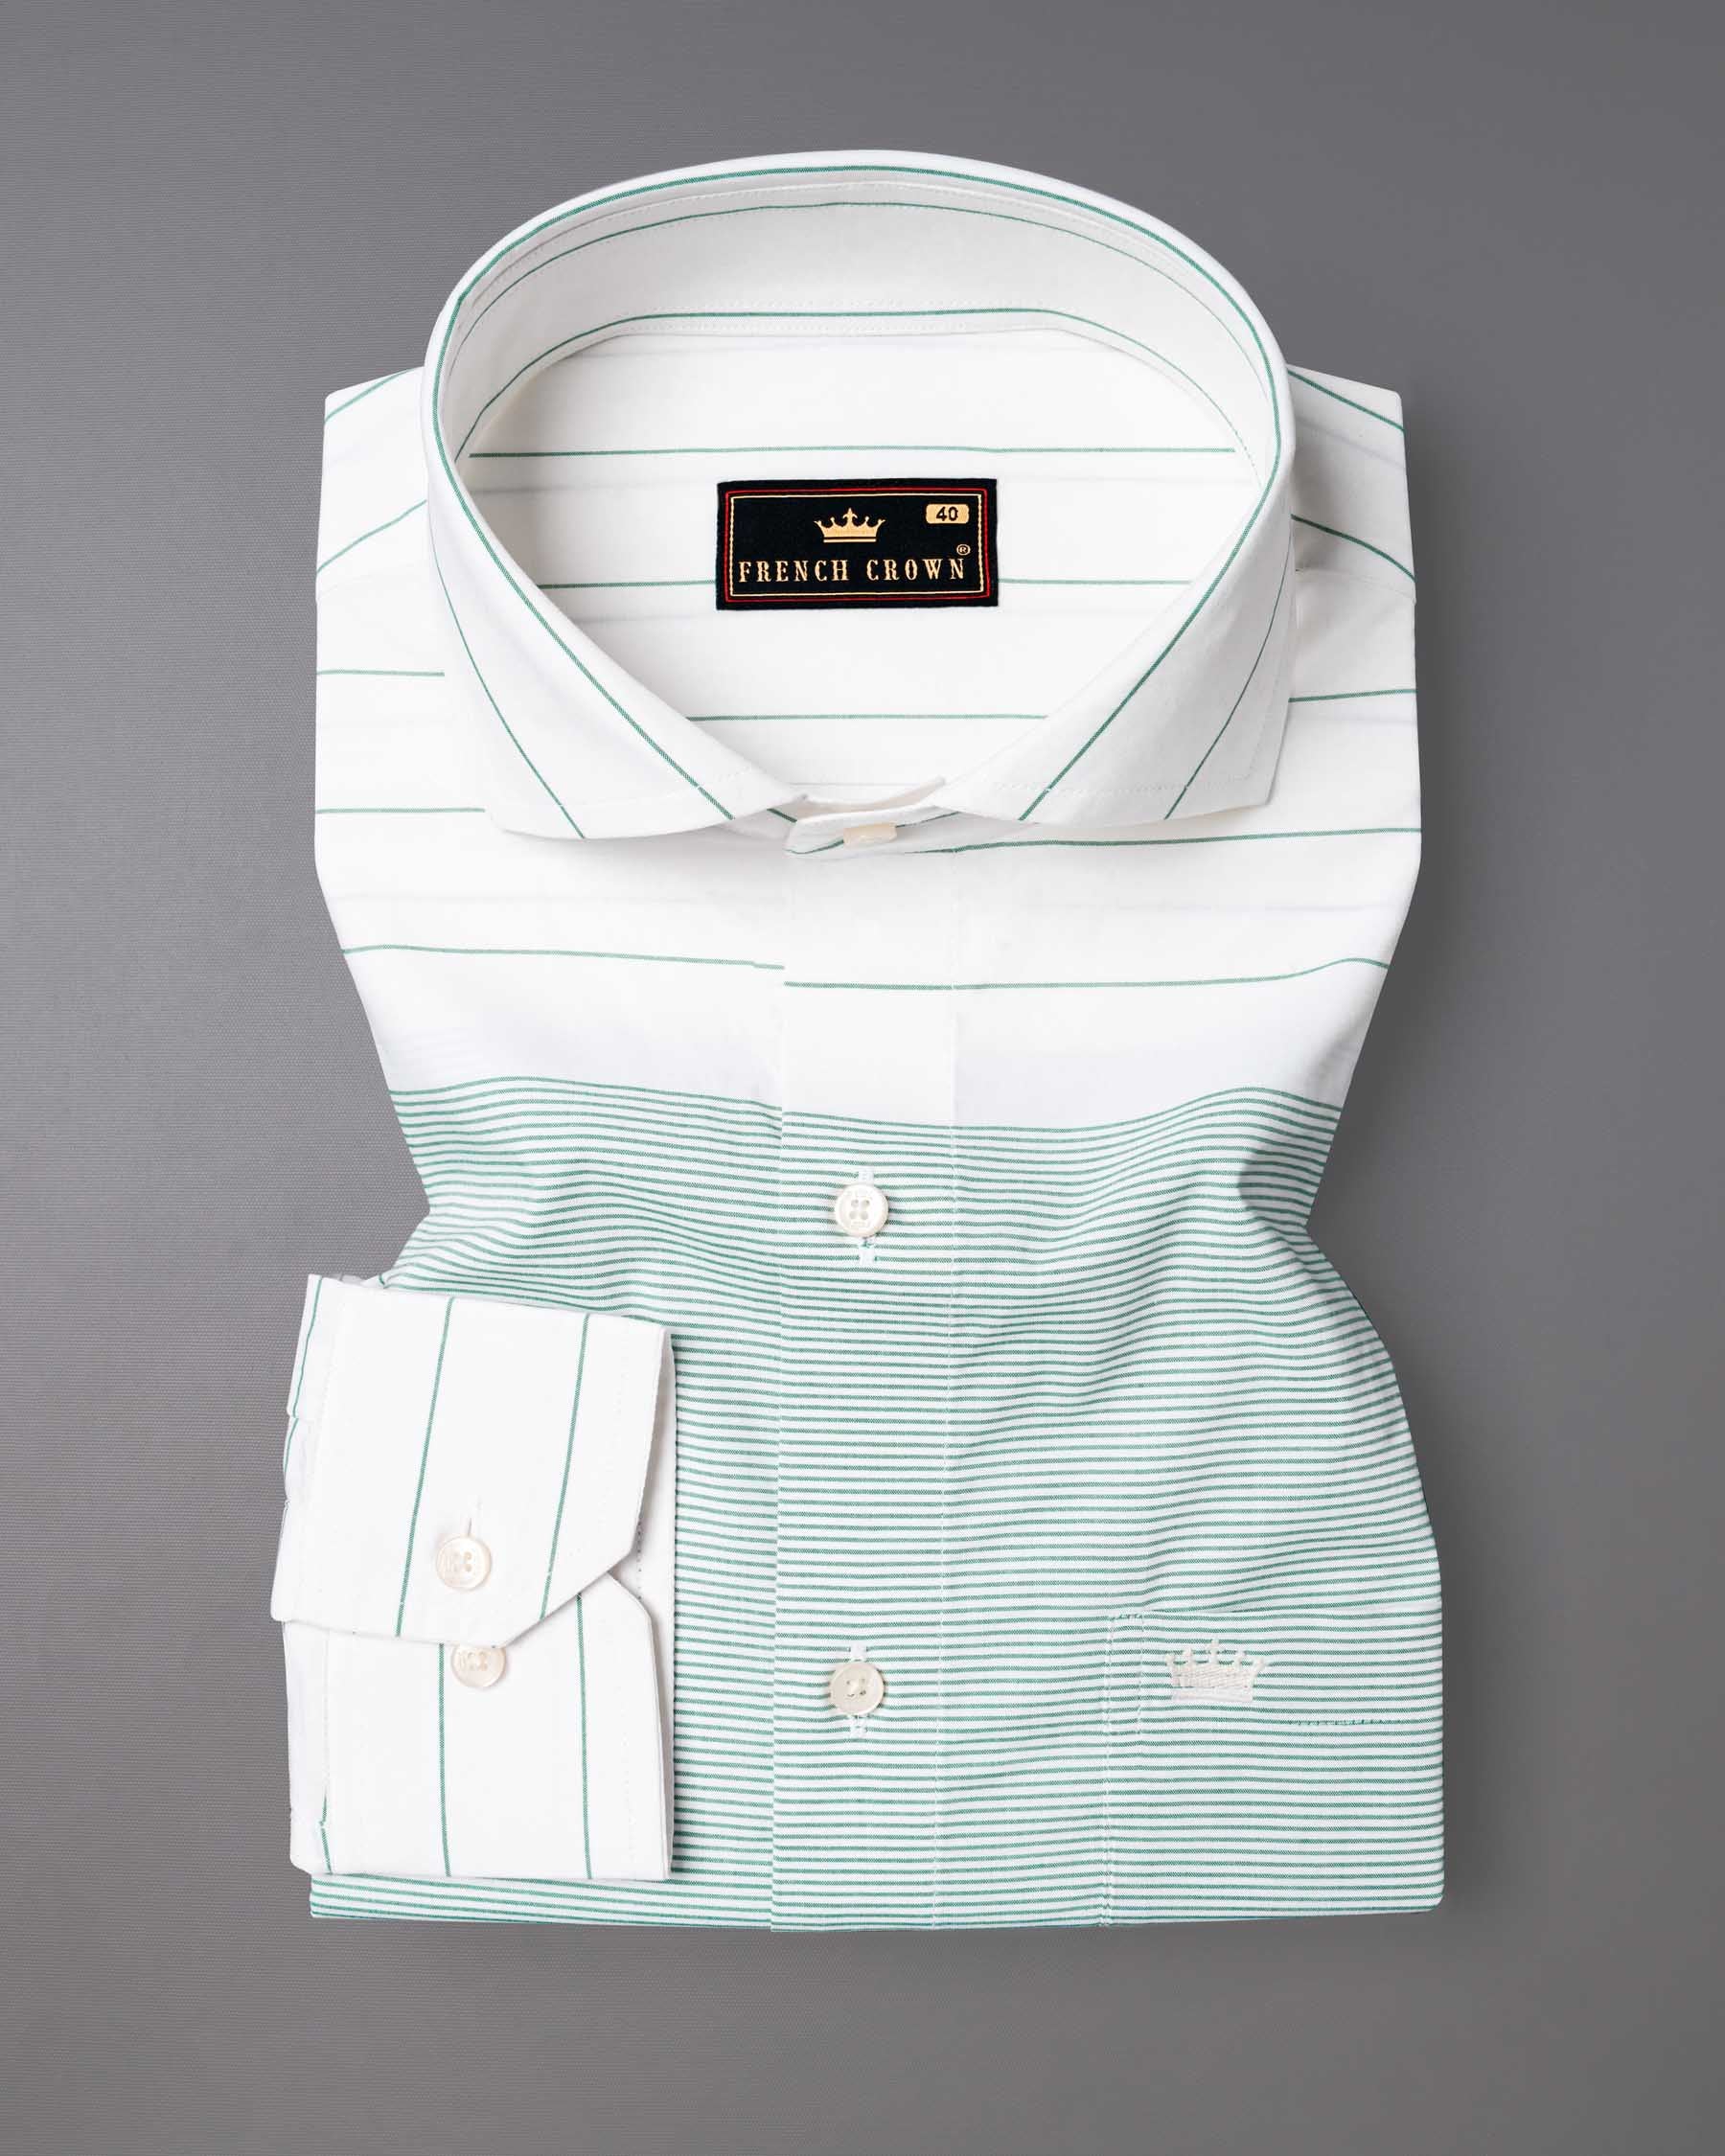 Bright White with Green Horizontal Striped Premium Cotton Shirt 6392-CA-38,6392-CA-H-38,6392-CA-39,6392-CA-H-39,6392-CA-40,6392-CA-H-40,6392-CA-42,6392-CA-H-42,6392-CA-44,6392-CA-H-44,6392-CA-46,6392-CA-H-46,6392-CA-48,6392-CA-H-48,6392-CA-50,6392-CA-H-50,6392-CA-52,6392-CA-H-52